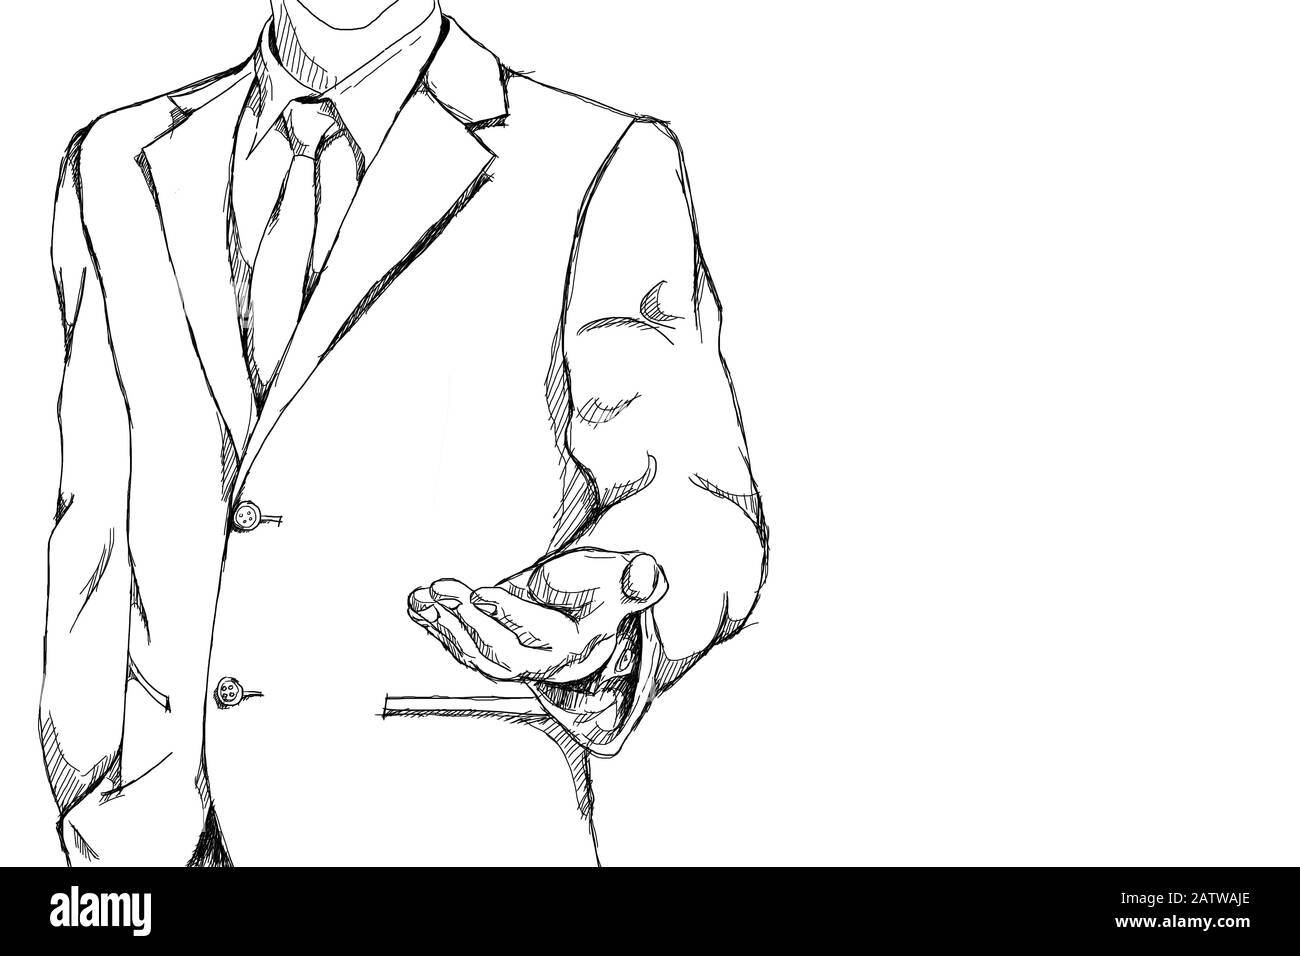 drawing sketch simple line of business man with open palm hand action for invite meaning on friendly business with copy space Stock Photo